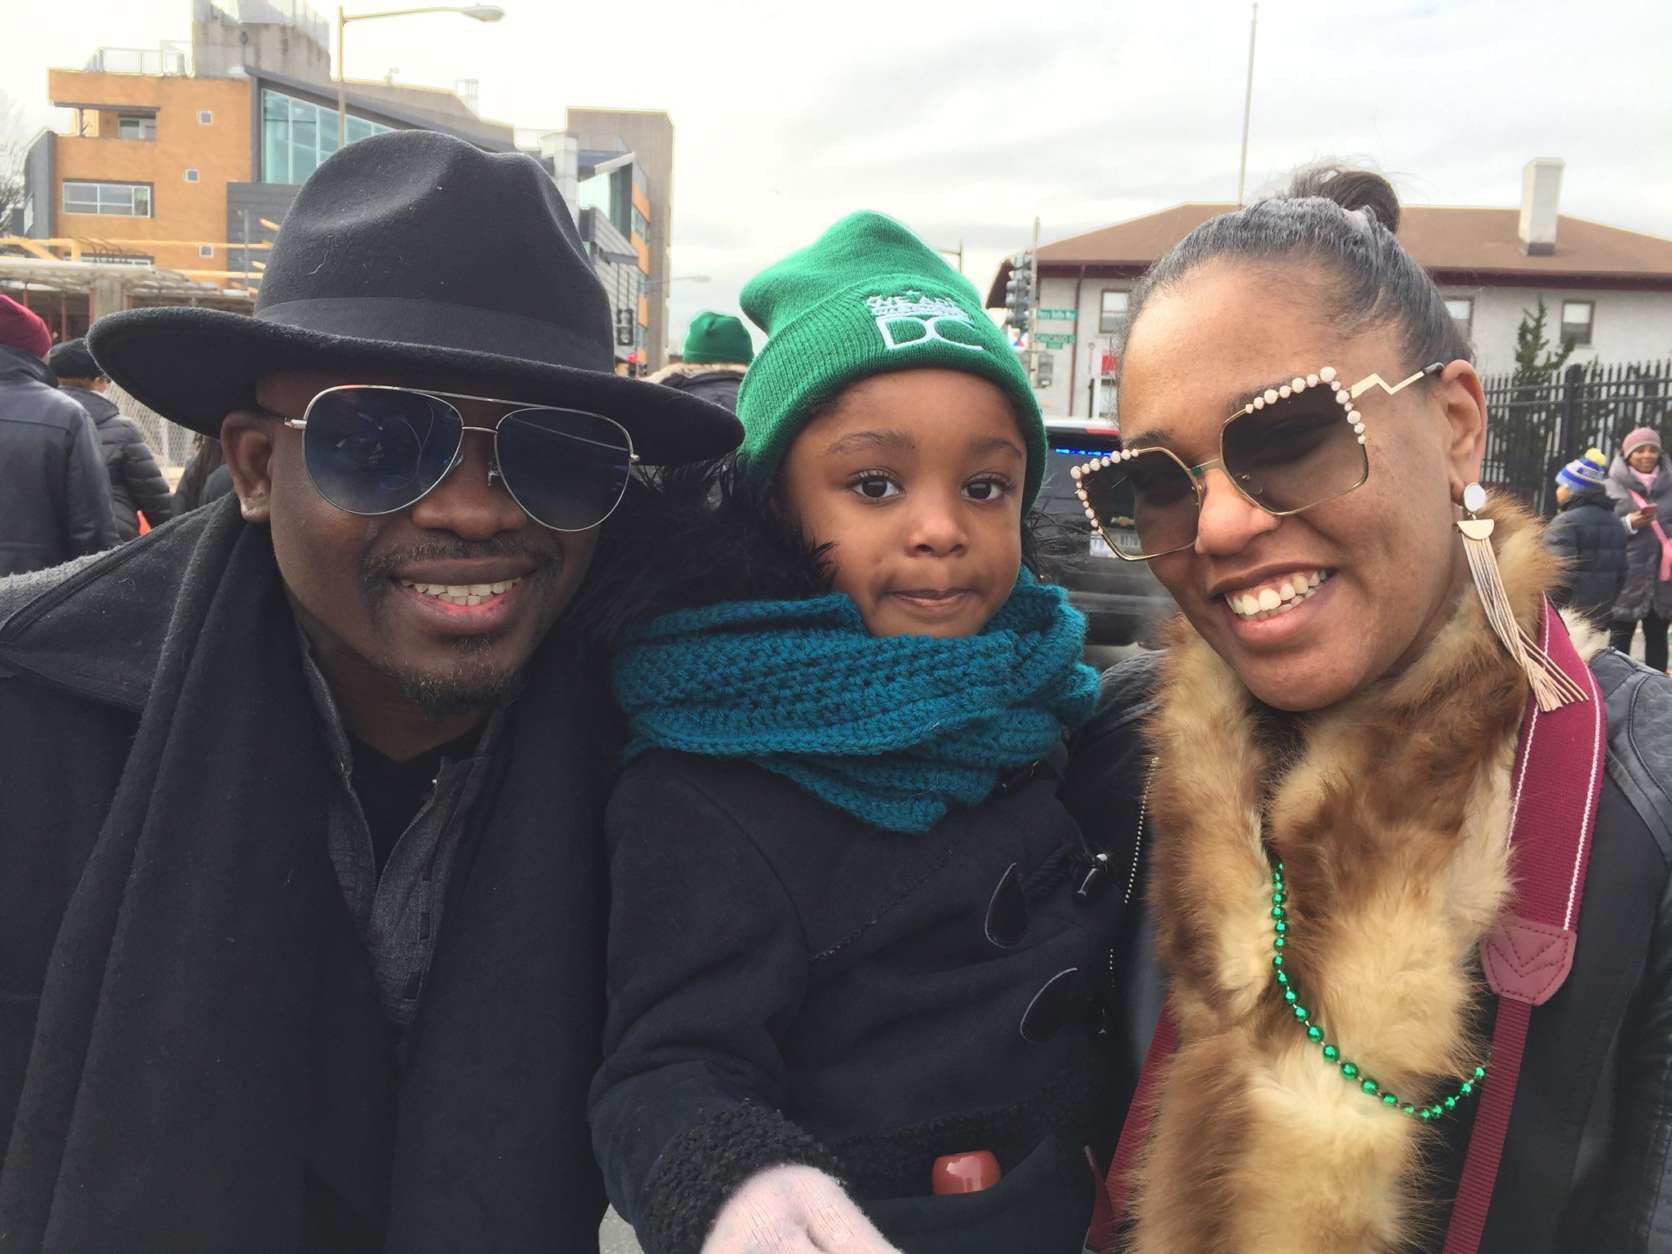 The Osuchukwu family smiles for a photo at the MLK Peace Walk and Parade. (WTOP/Kristi King)